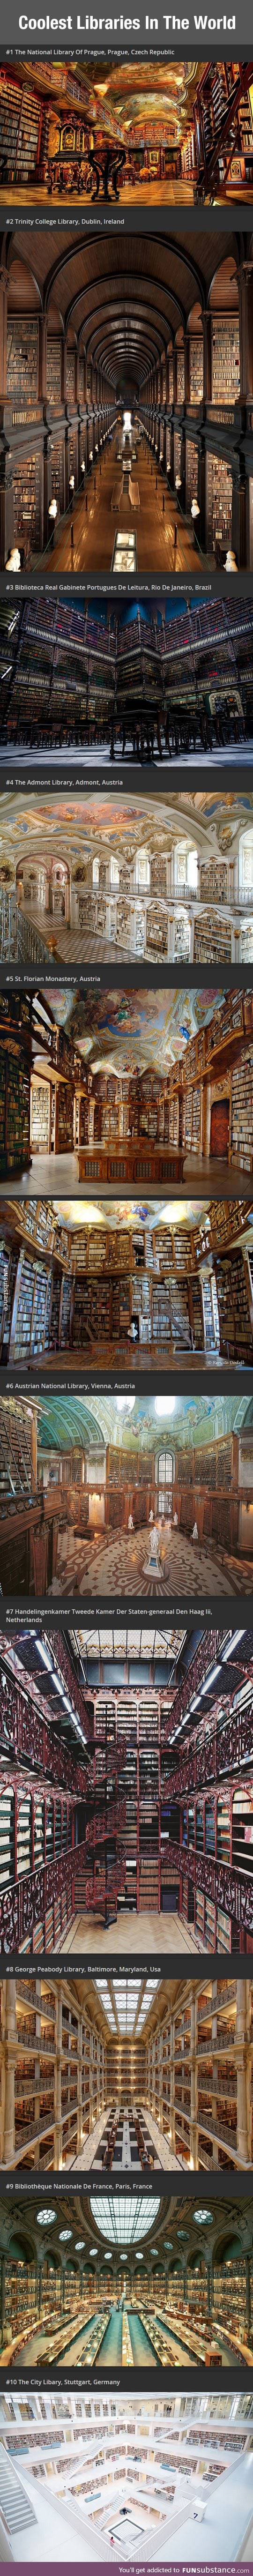 10 Coolest libraries in the world